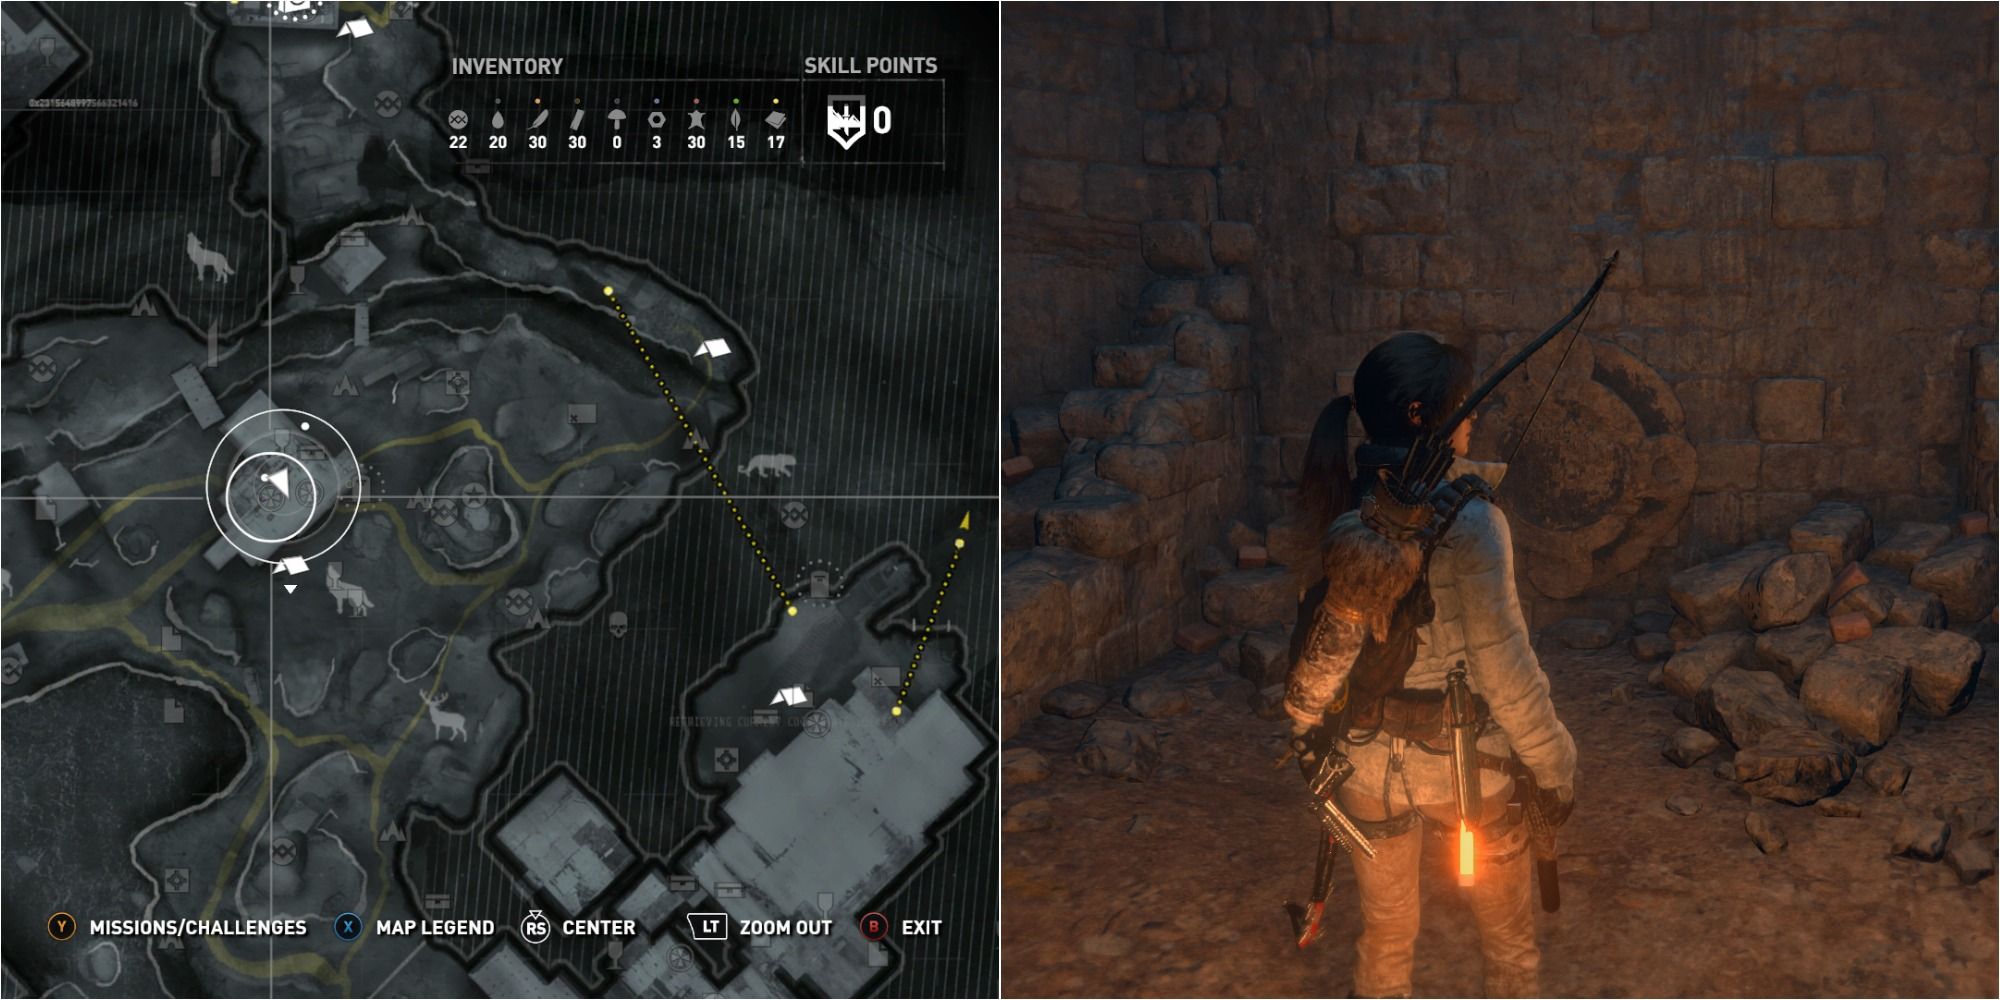 Rise Of The Tomb Raider Split Image Showing Soviet Installation Challenge Tomb Mural